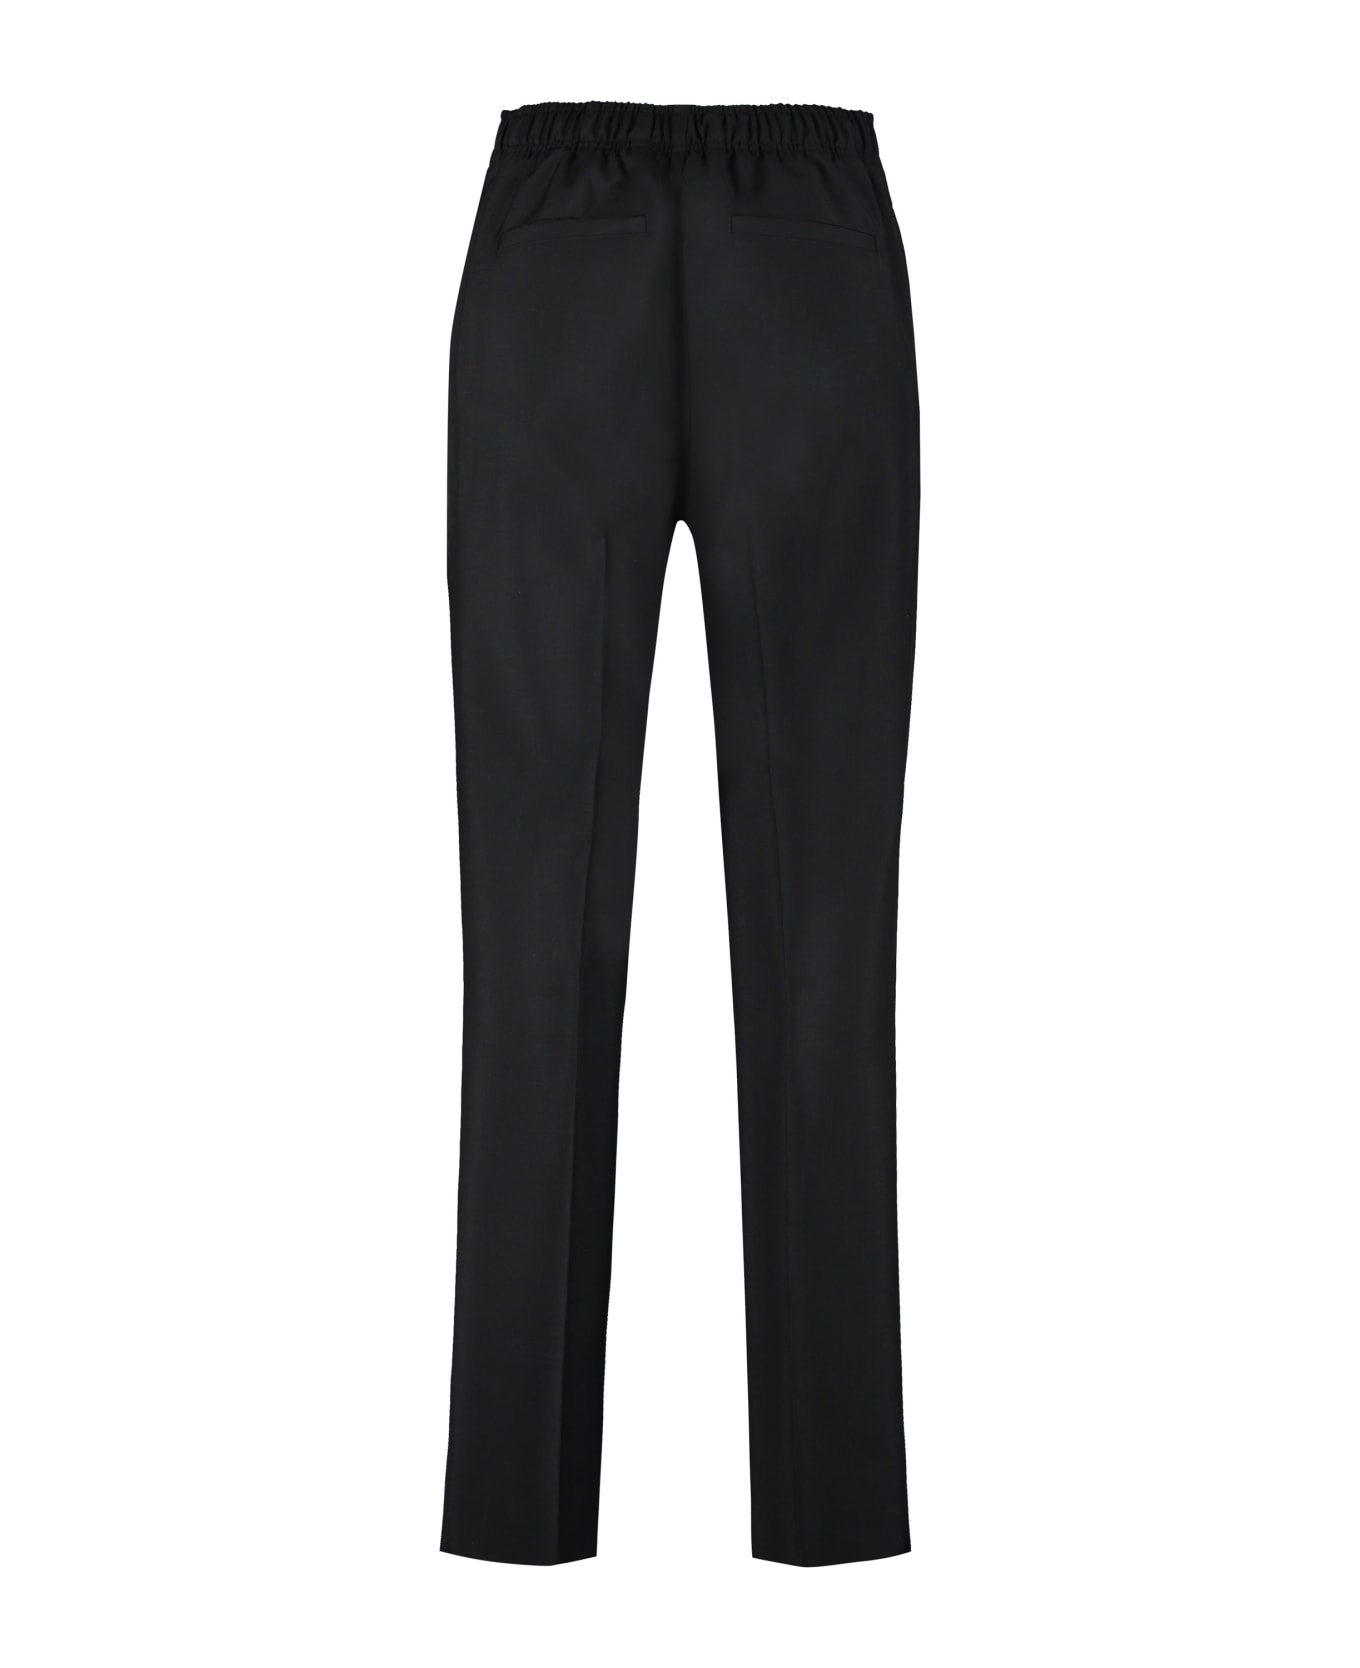 Givenchy Tailored Wool Trousers - BLACK